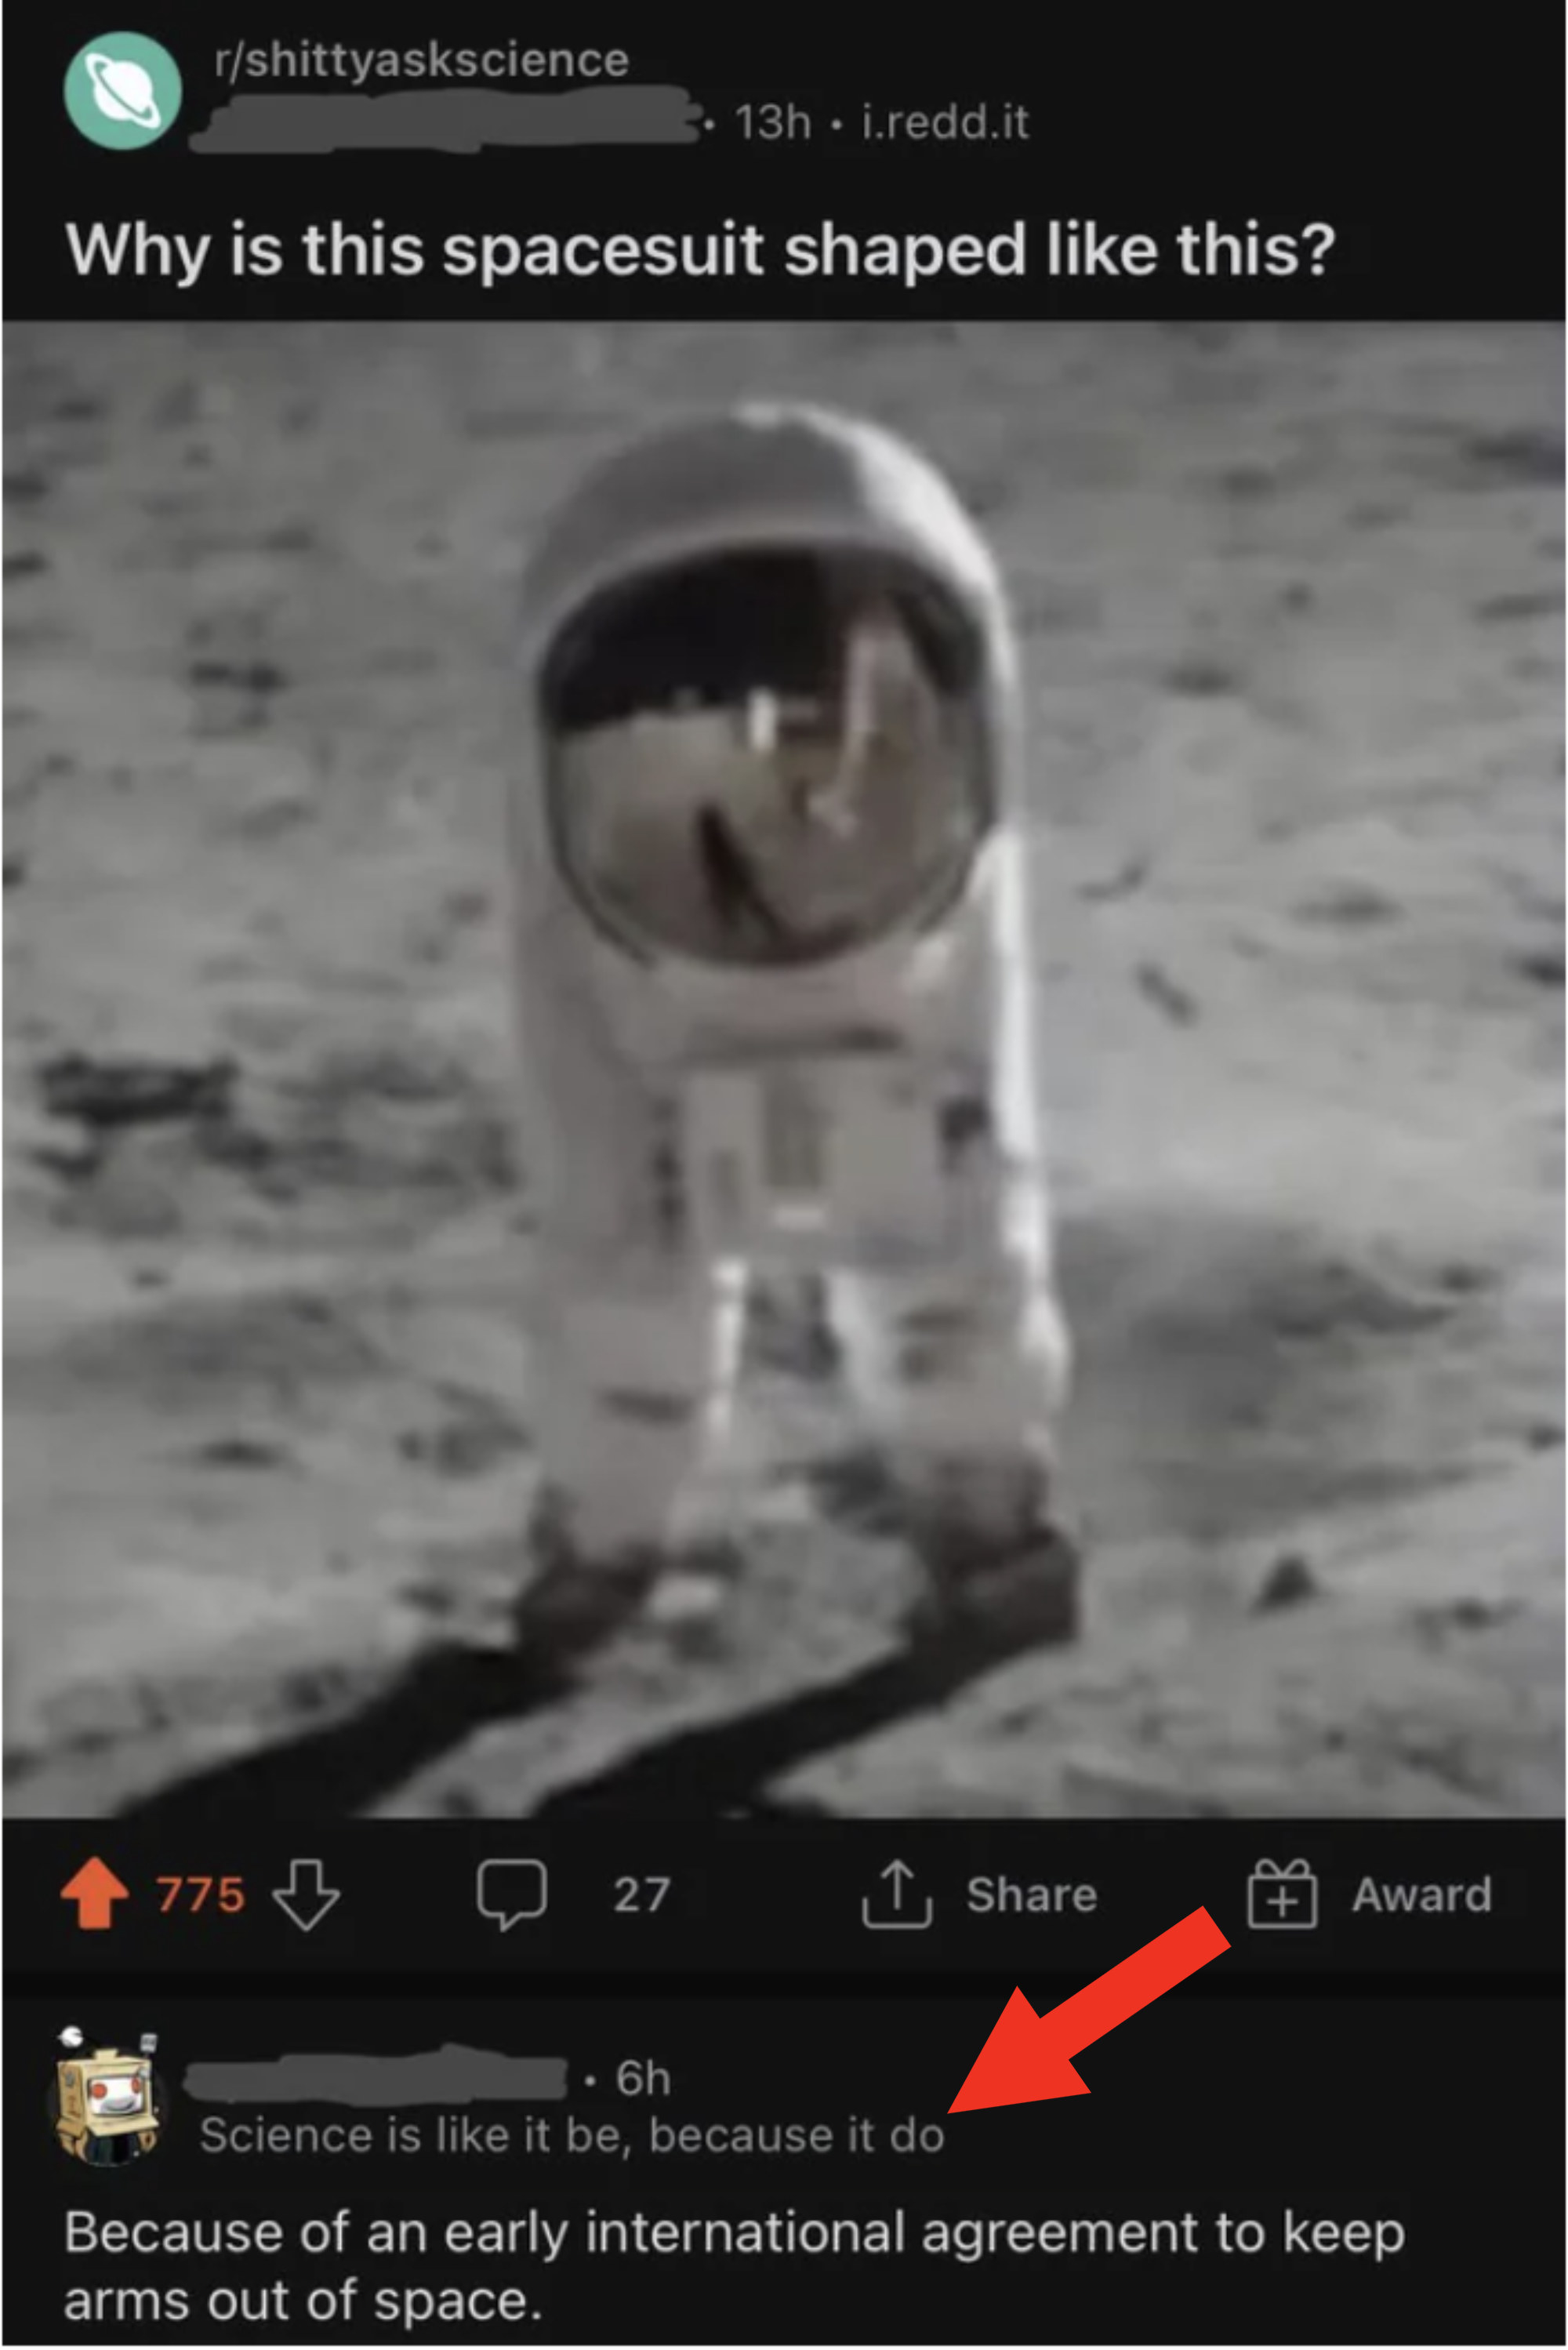 A image of a photoshopped particular person on the moon makes their spacesuit mediate relish there's perfect legs and a head, and a commenter says there used to be an "early global agreement to defend arms out of dwelling"